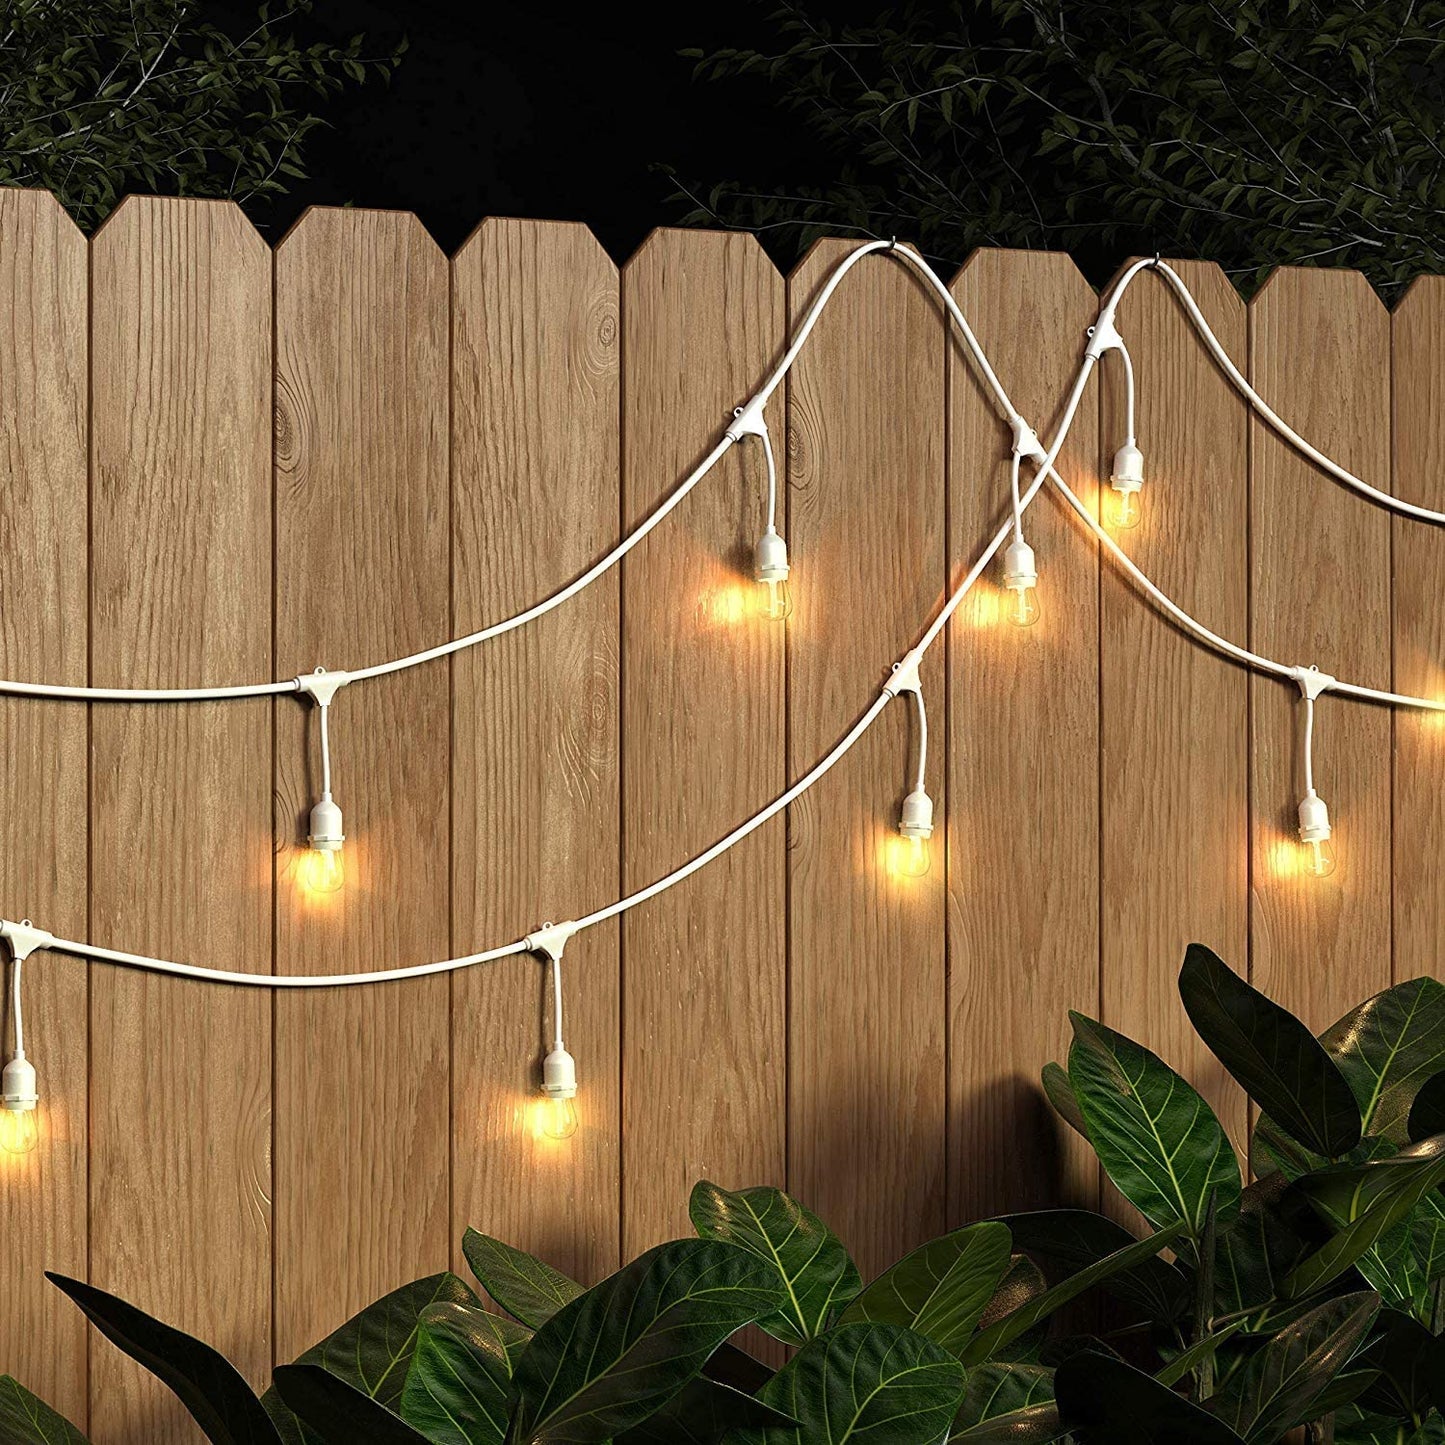 Basics 48-Foot LED Commercial Grade Outdoor String Lights with 16 Edison Style S14 LED Soft White Bulbs - White Cord